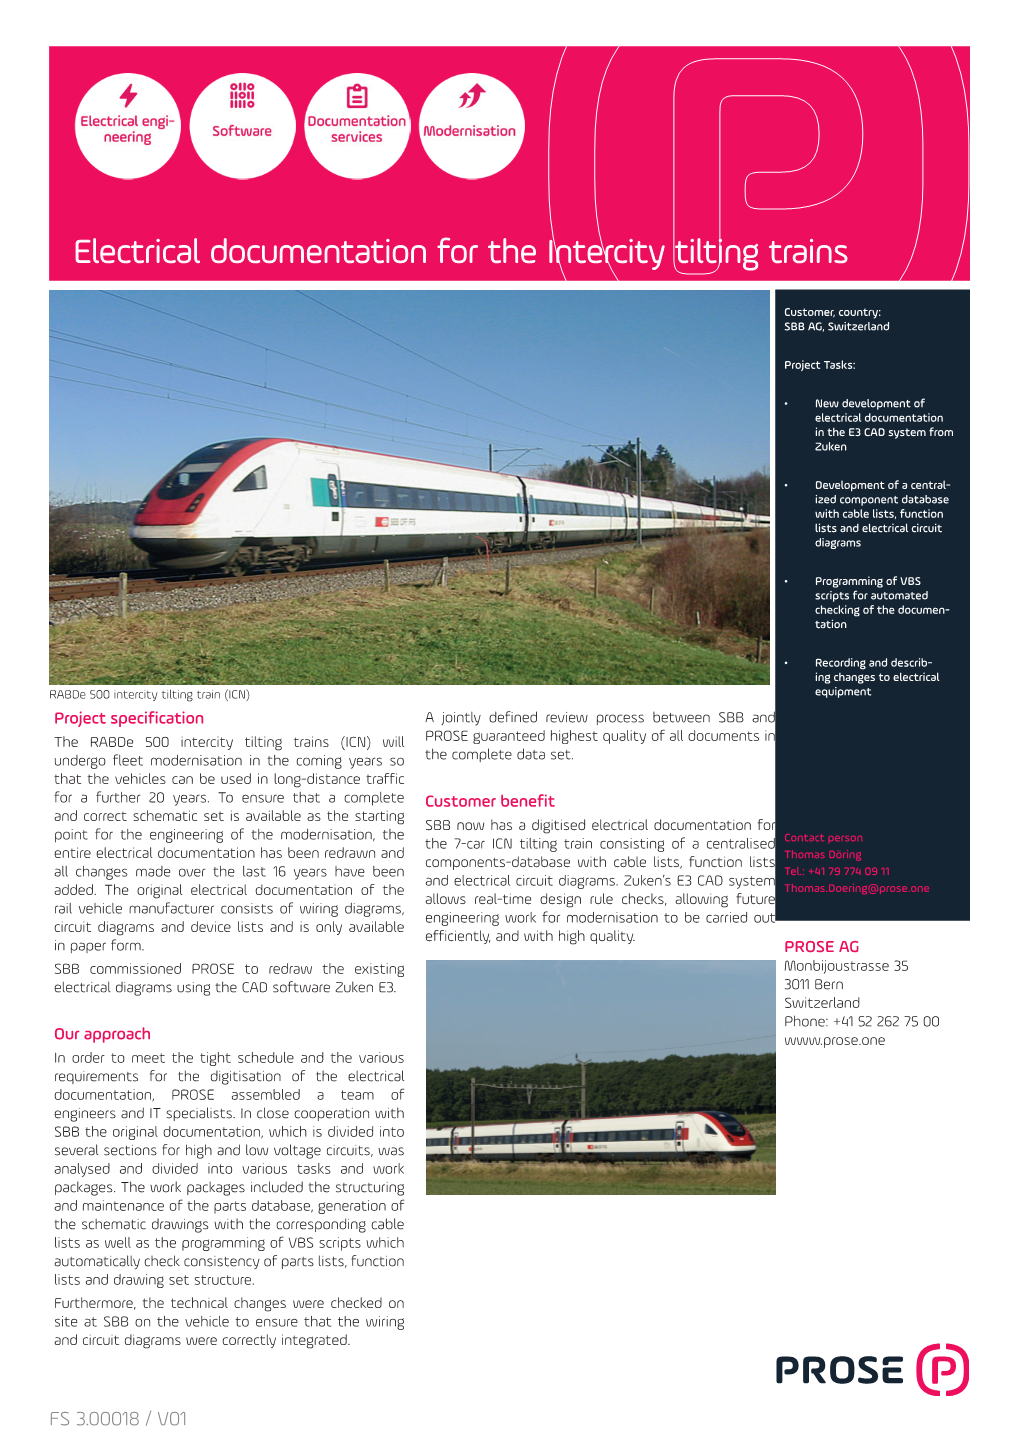 Electrical Documentation for the Intercity Tilting Trains